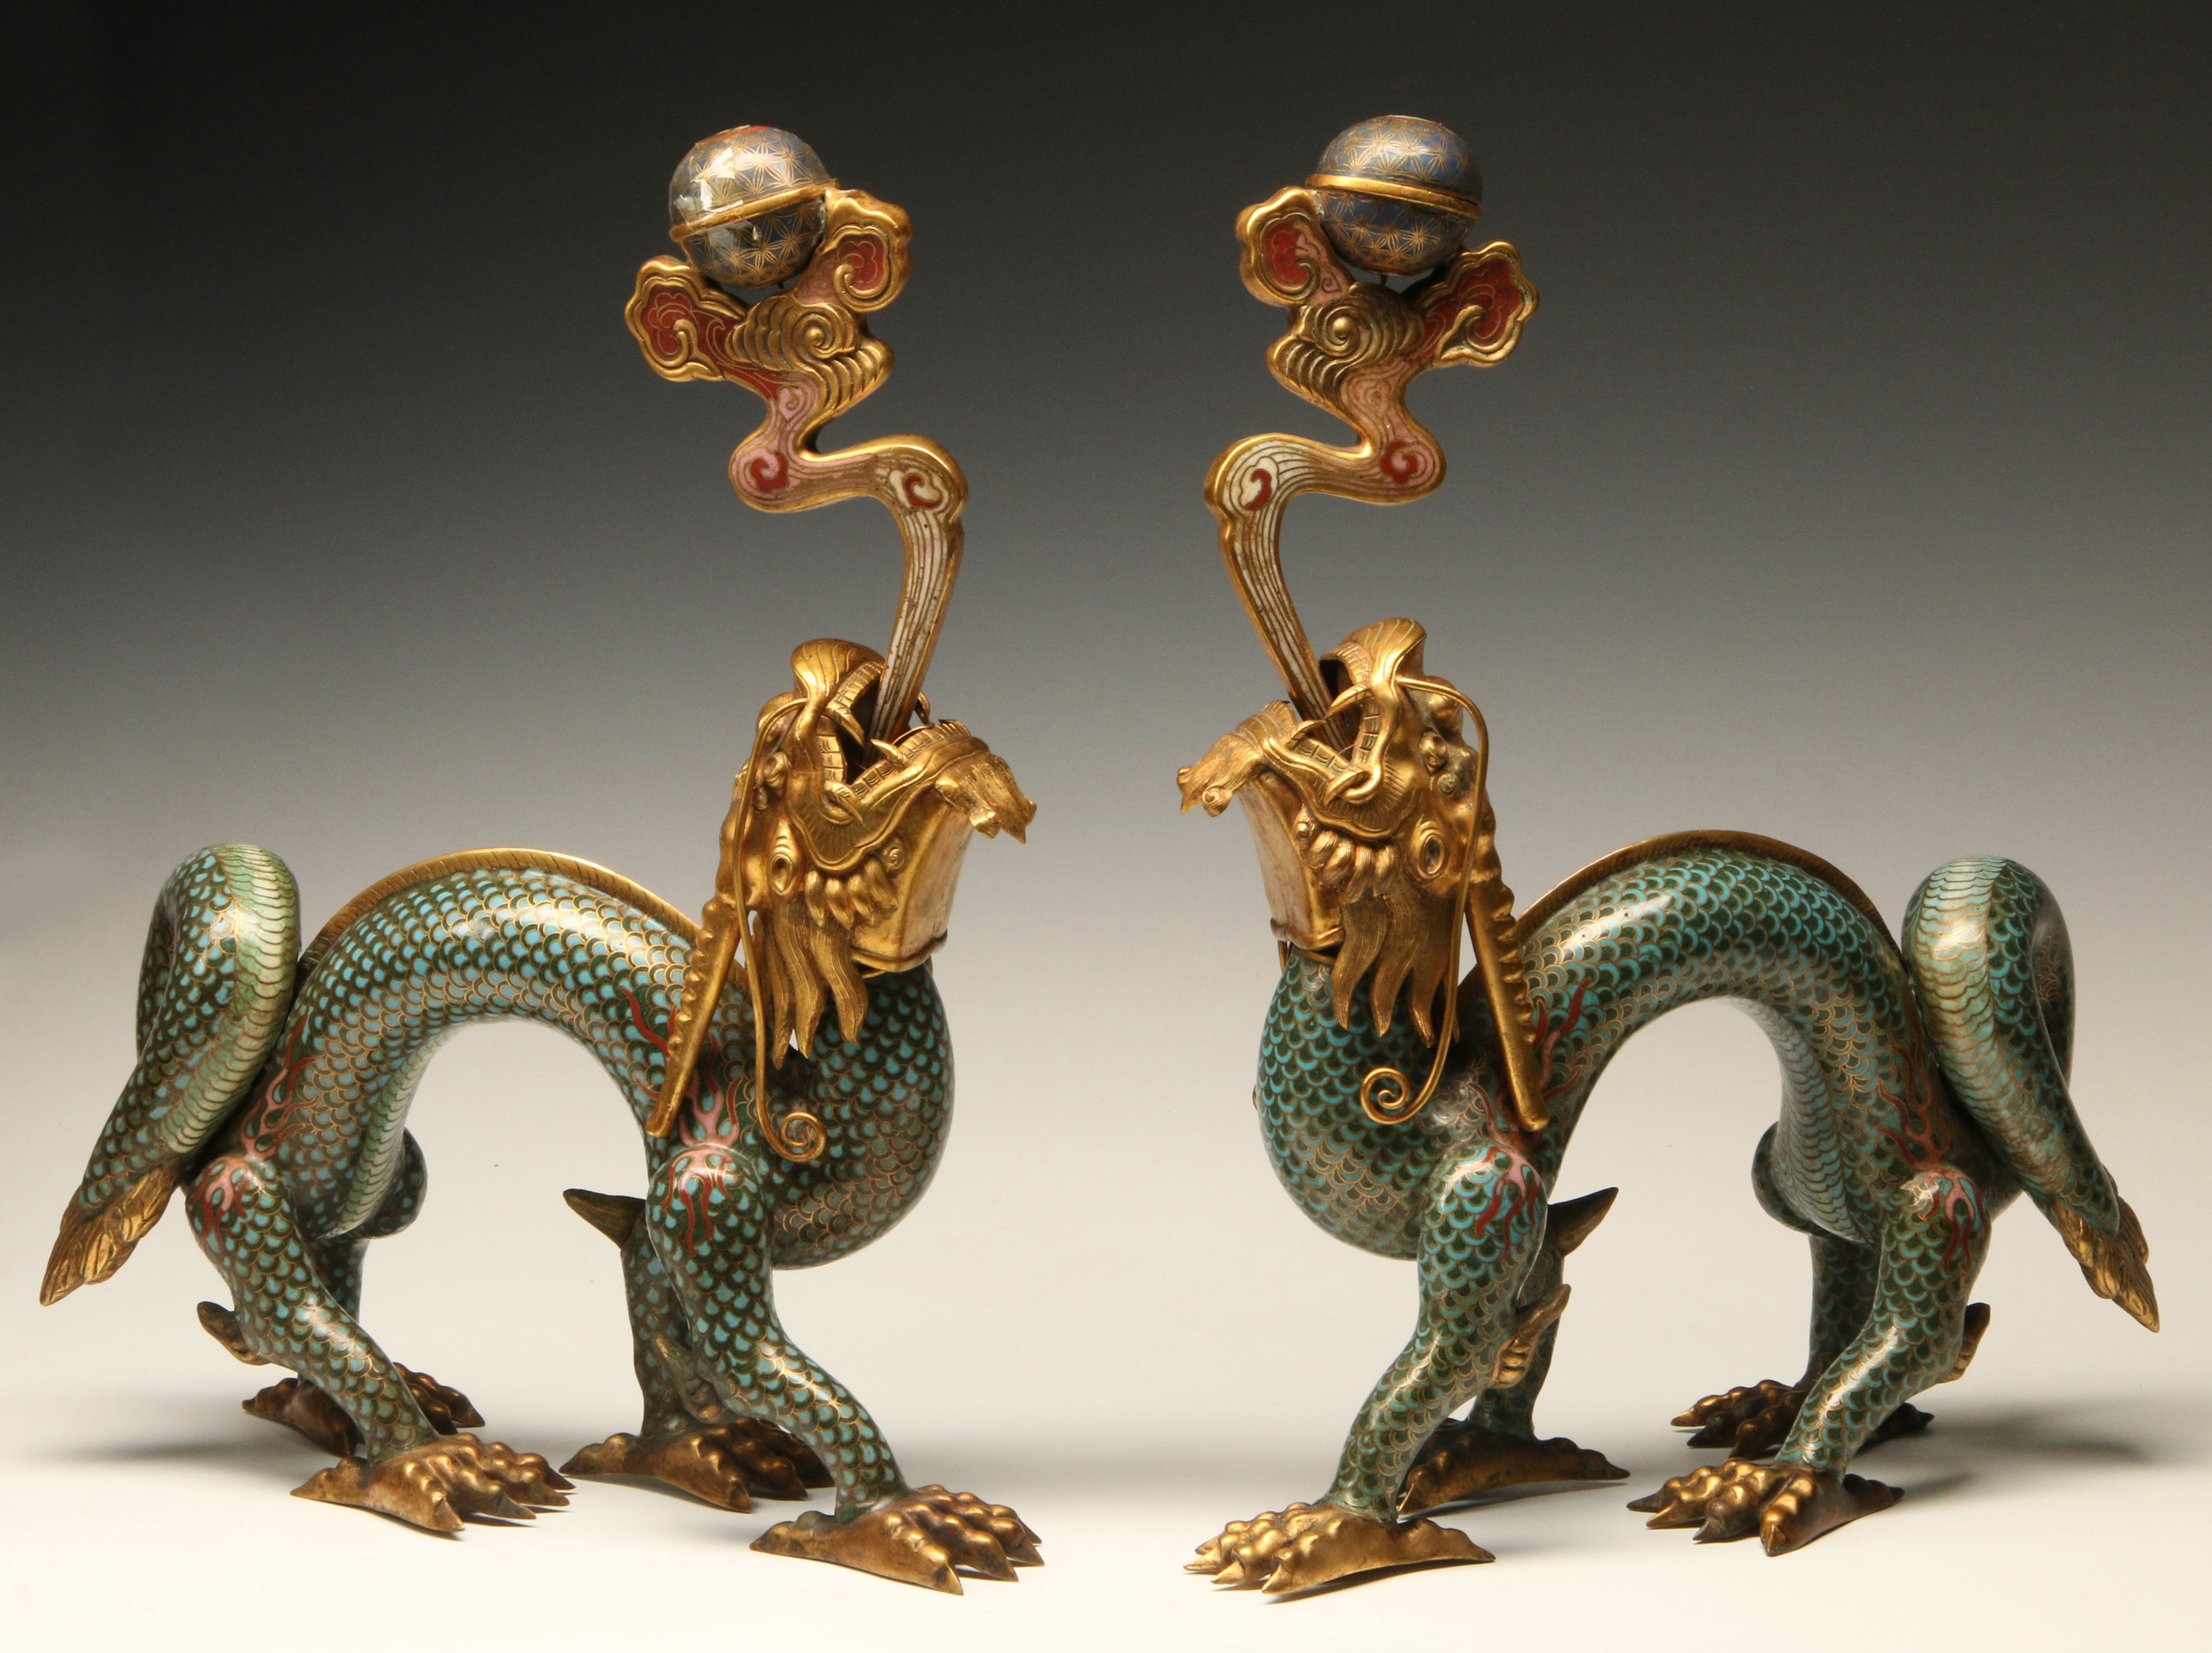 A PAIR LATE QING DYNASTY CLOISONNE DRAGON VESSELS